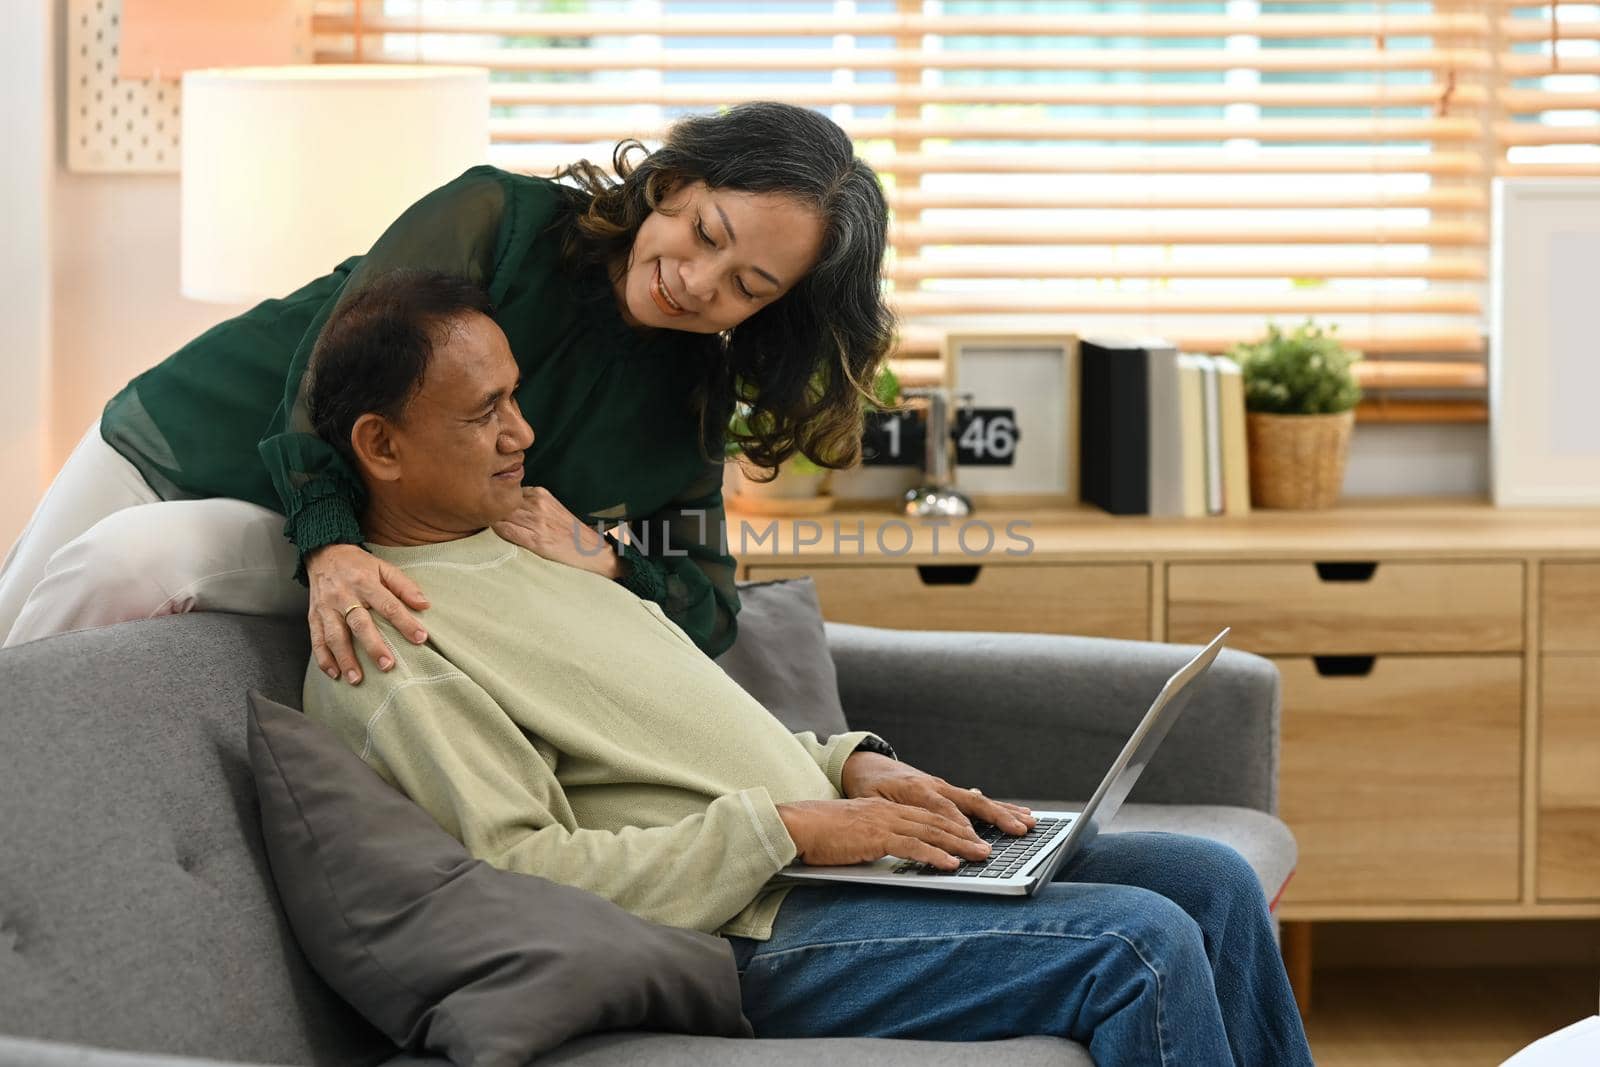 Loving senior couple resting on couch in living room and using laptop. Elderly and technology concept.